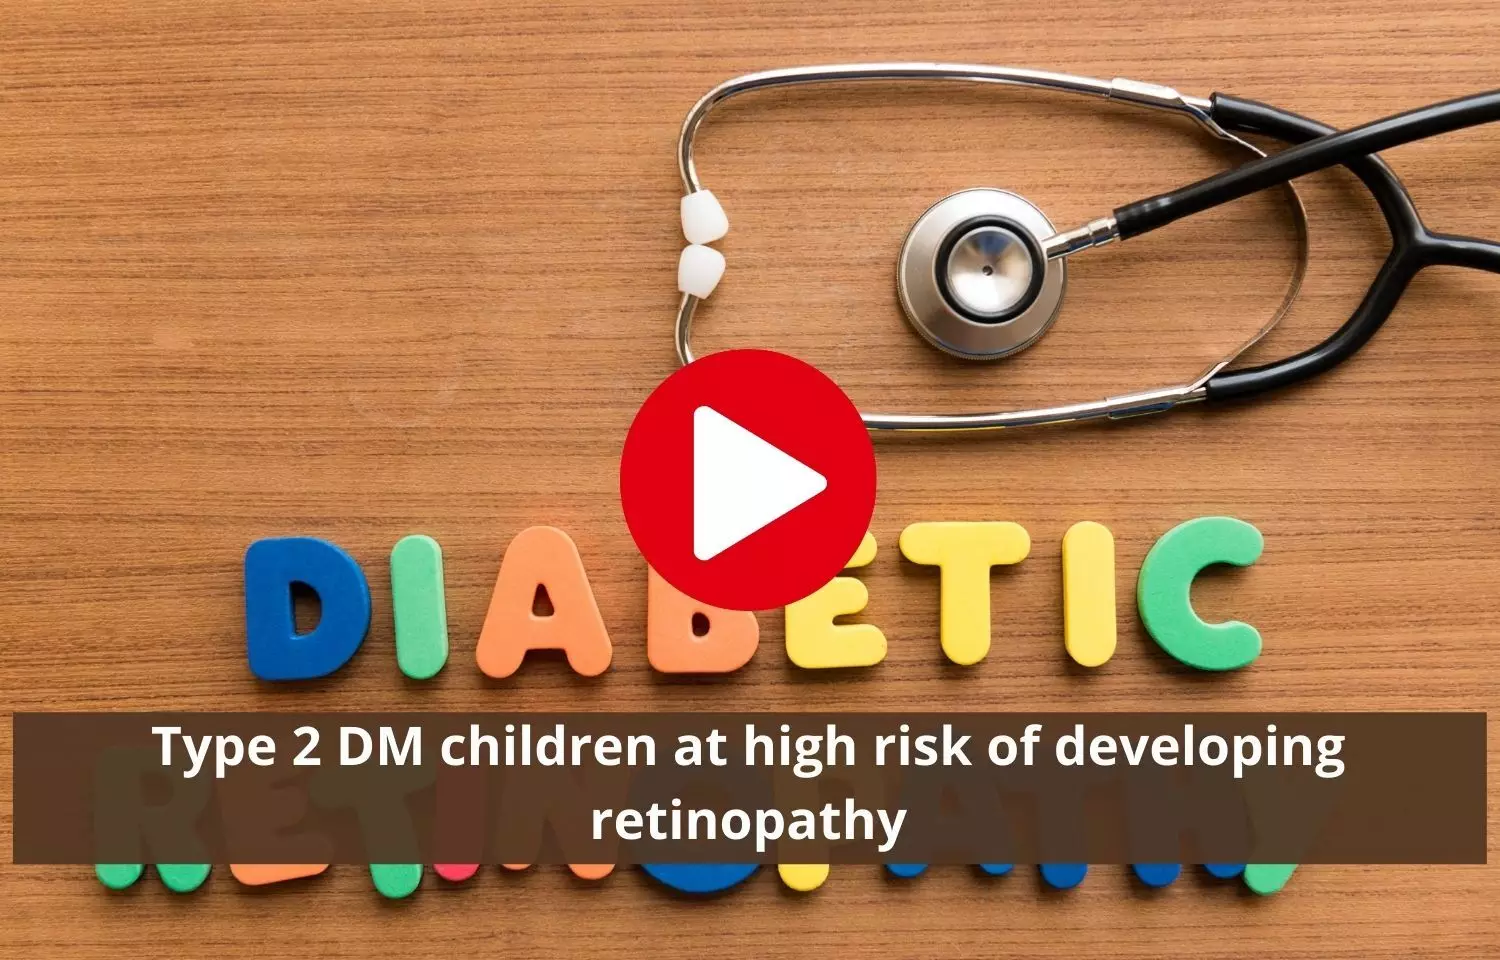 Diabetic retinopathy occurs more in children with type 2 diabetes